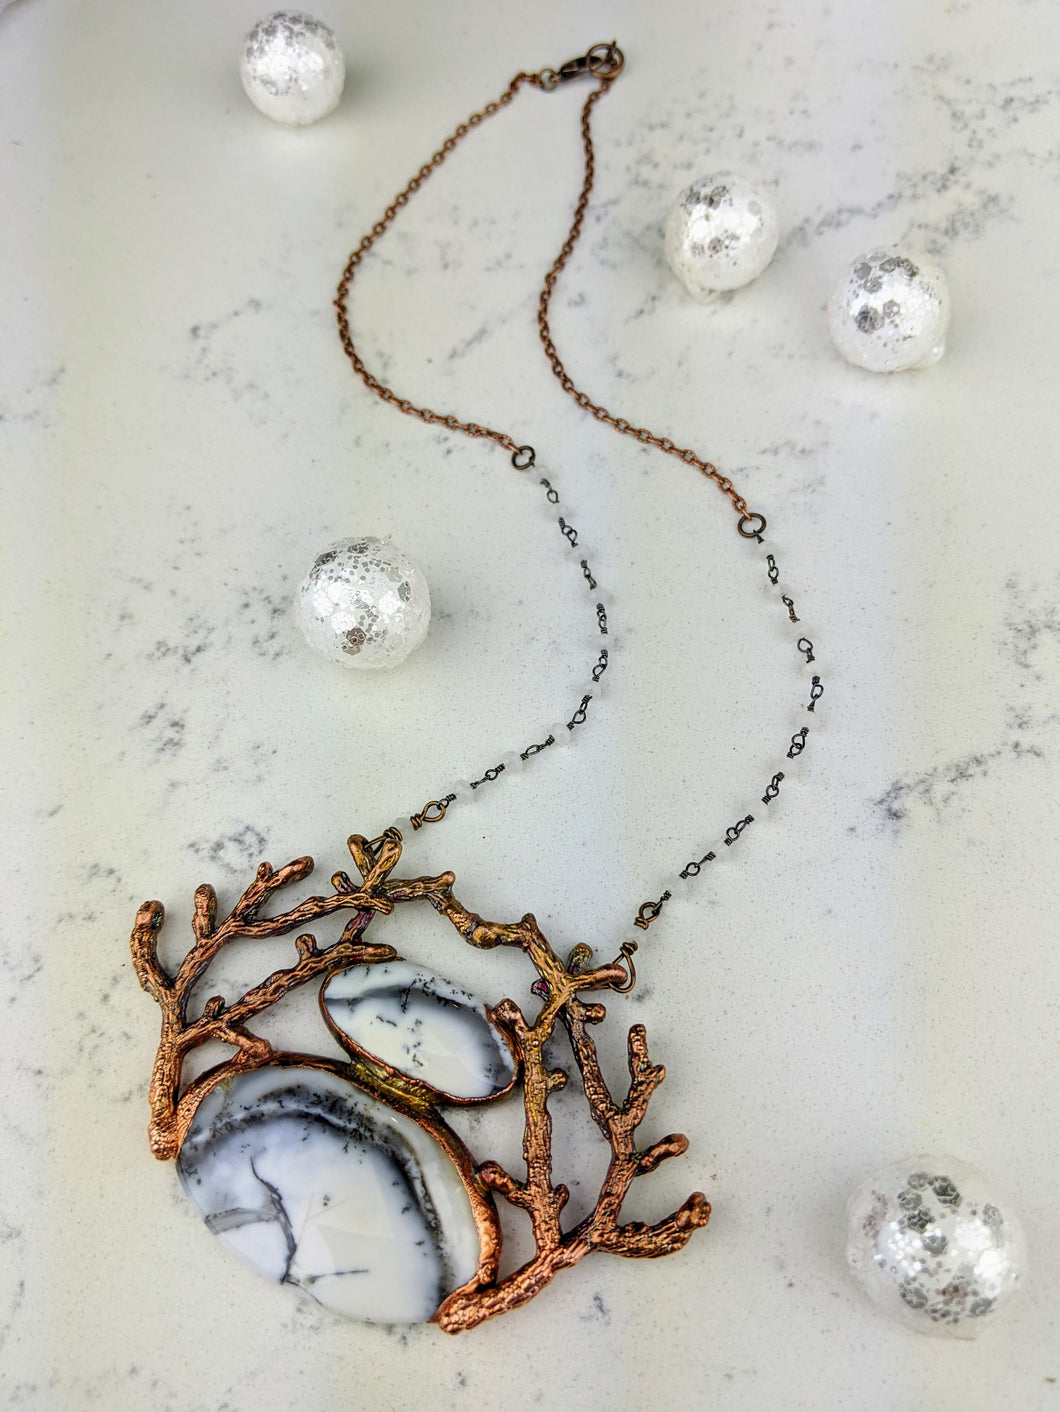 Electroformed Winter Branches with Dendritic Opal - 6 - Minxes' Trinkets